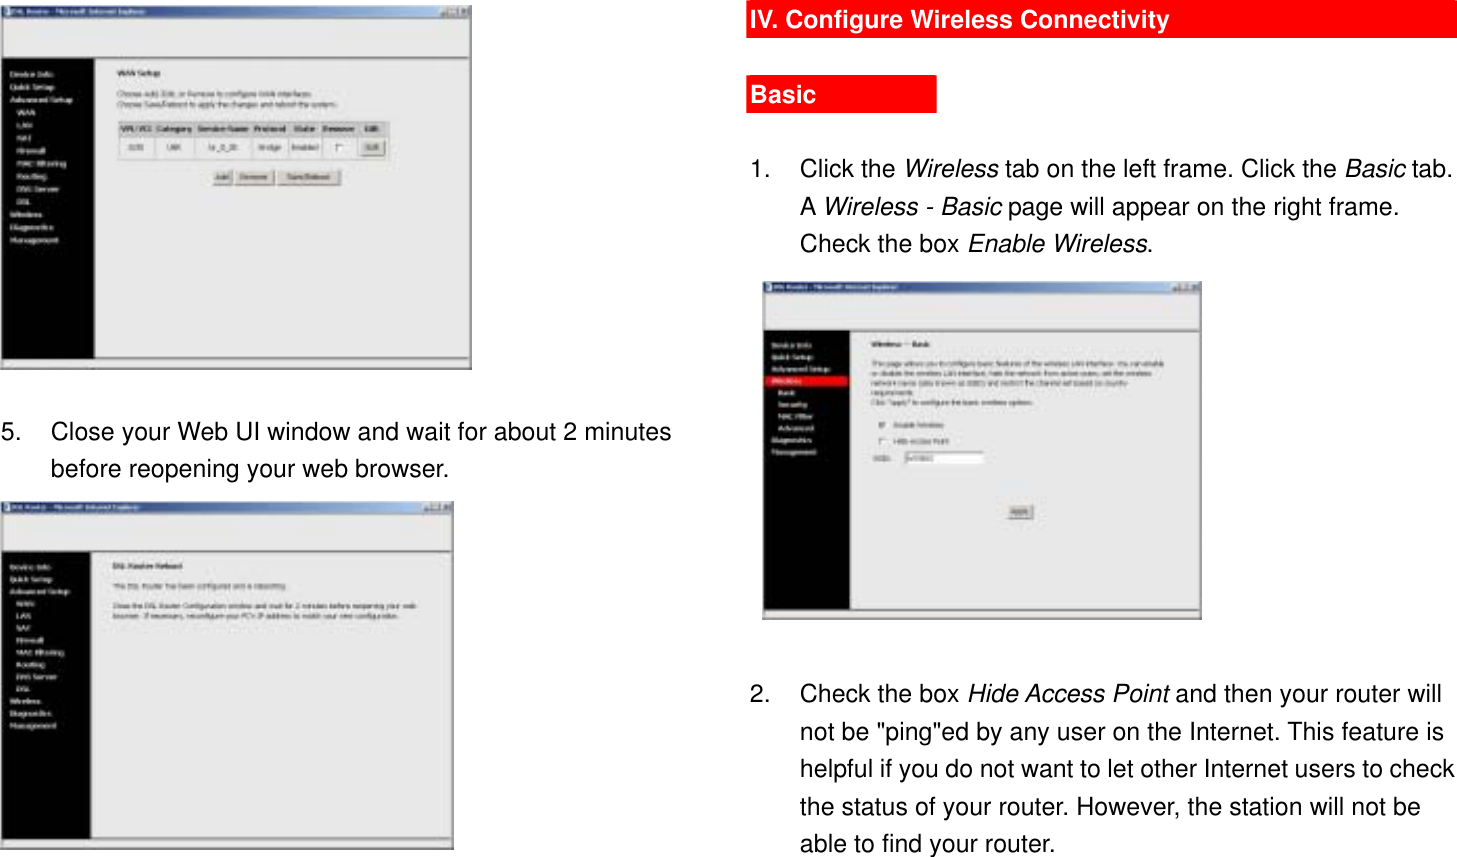   5.  Close your Web UI window and wait for about 2 minutes before reopening your web browser.  IV. Configure Wireless Connectivity  Basic  1. Click the Wireless tab on the left frame. Click the Basic tab. A Wireless - Basic page will appear on the right frame. Check the box Enable Wireless.     2.  Check the box Hide Access Point and then your router will not be &quot;ping&quot;ed by any user on the Internet. This feature is helpful if you do not want to let other Internet users to check the status of your router. However, the station will not be able to find your router. 